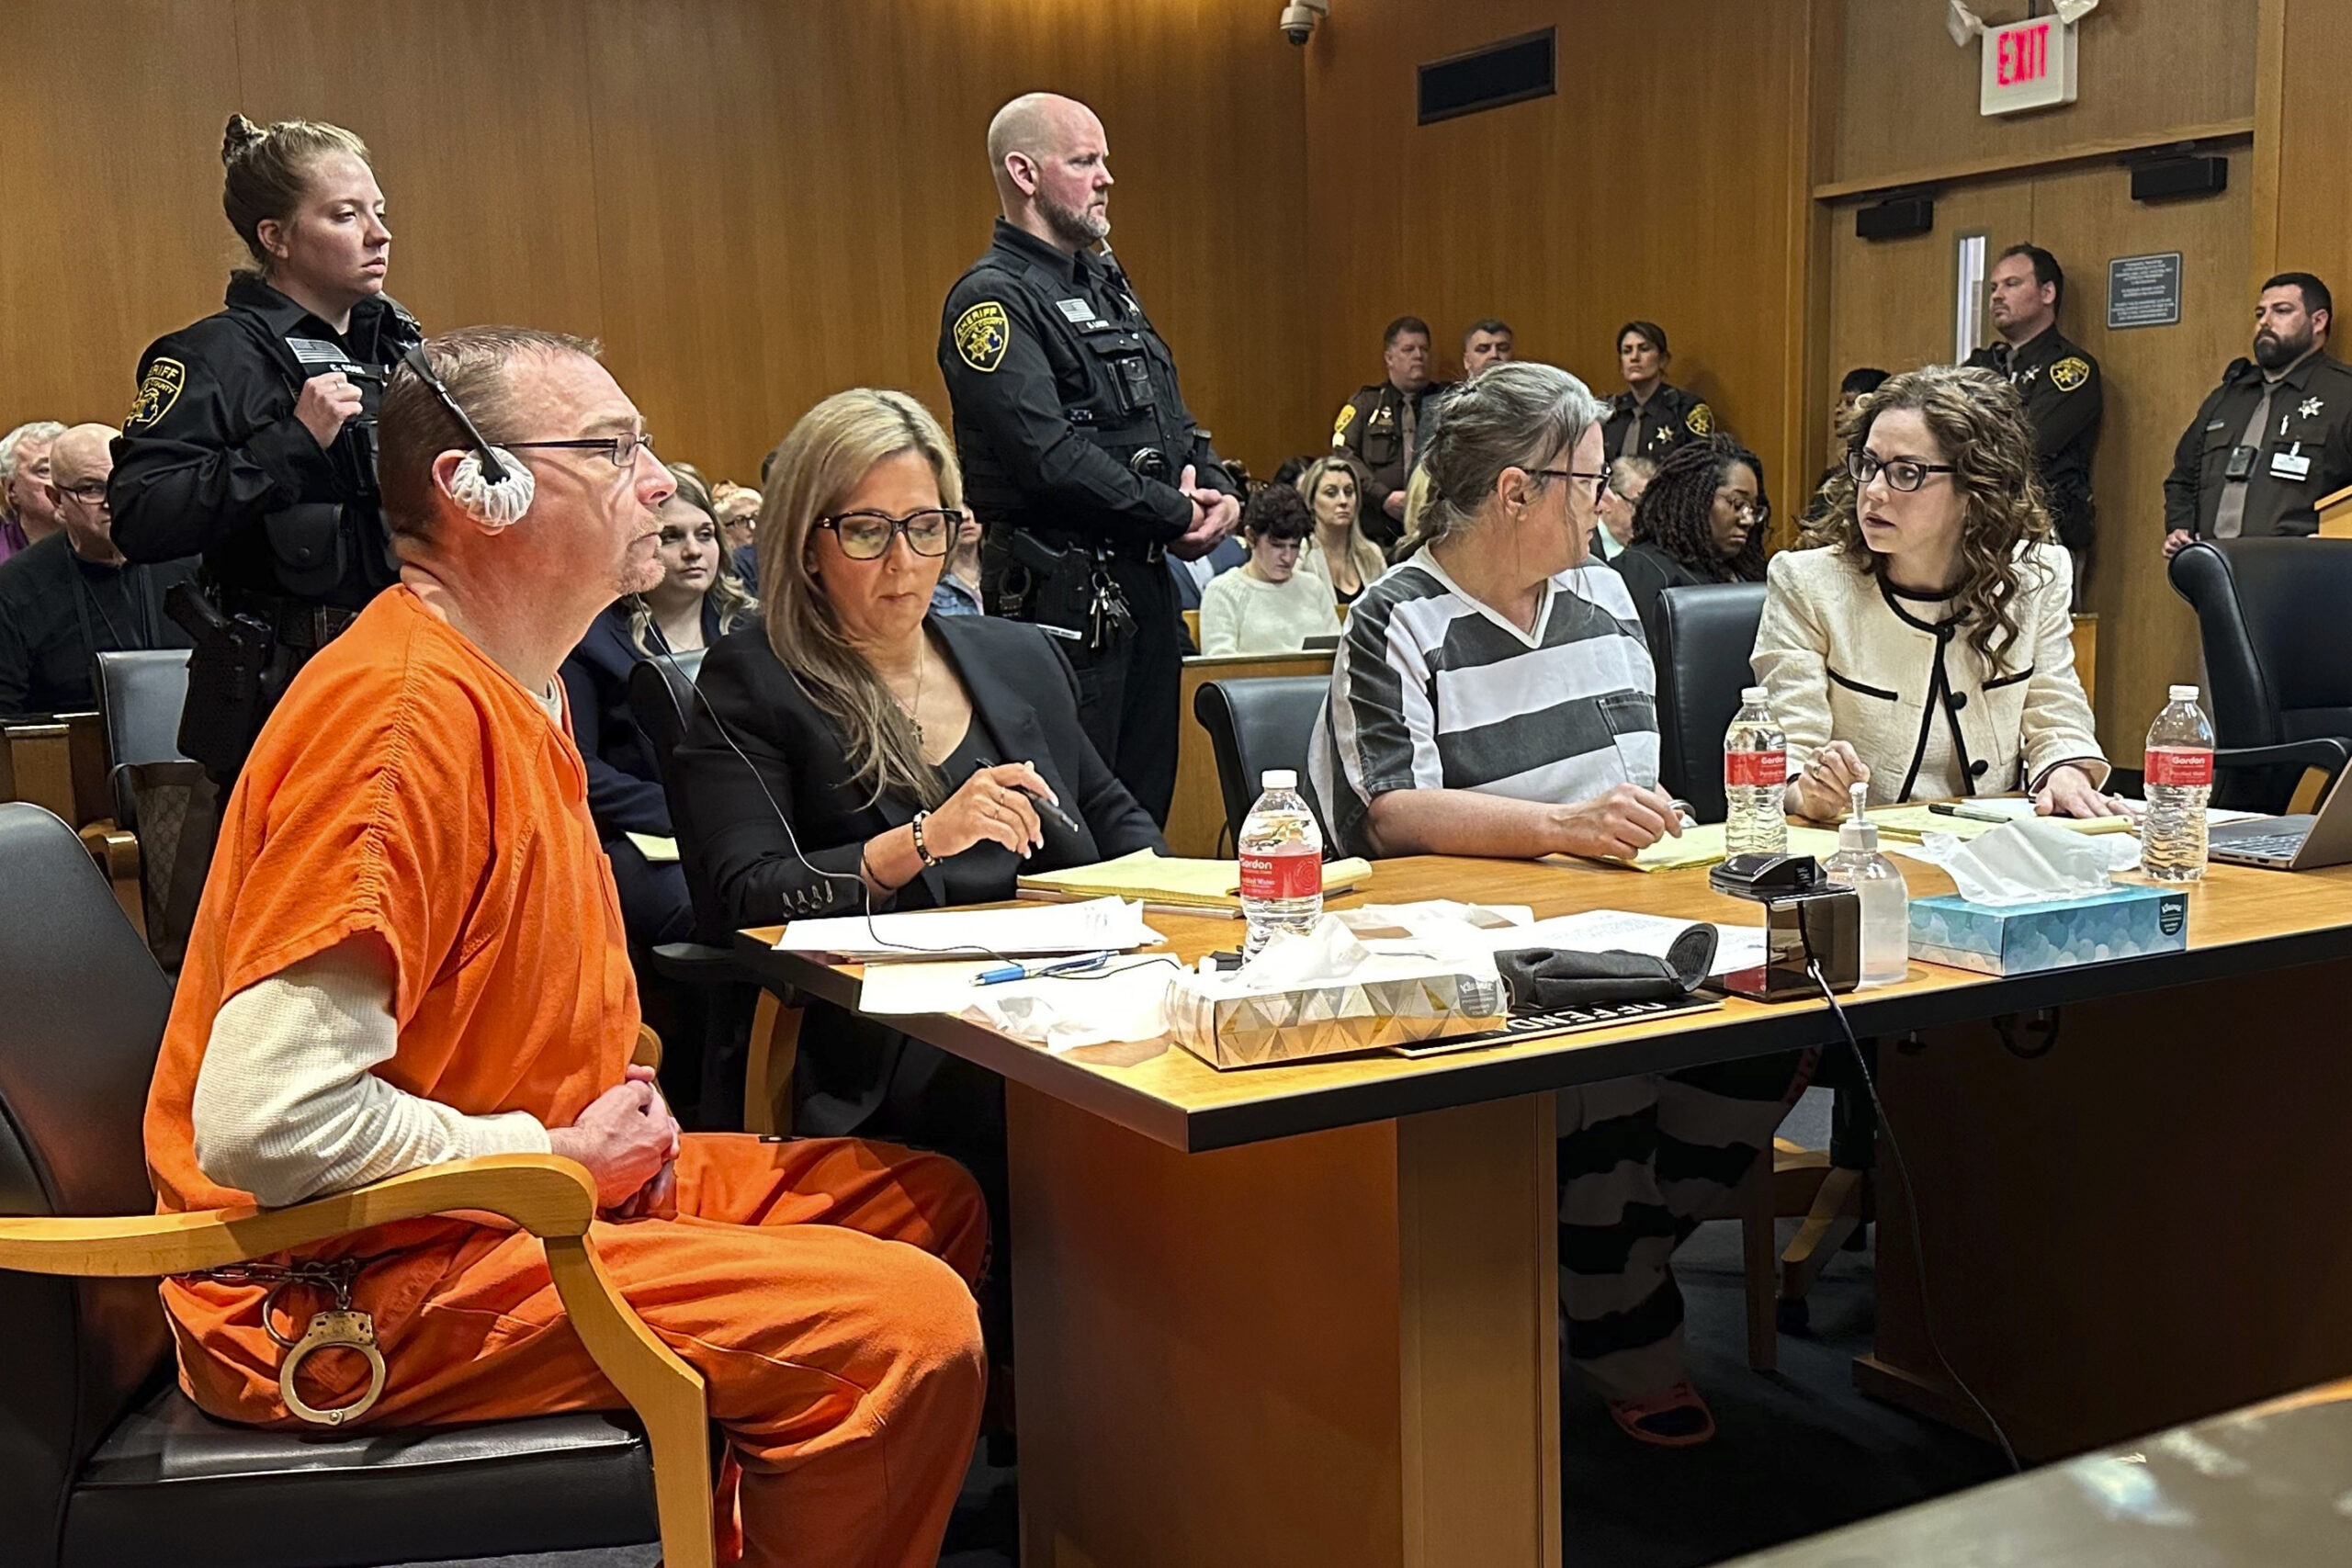 From left, James Crumbley, defense lawyer Mariell Lehman, Jennifer Crumbley, and defense lawyer Shannon Smith await sentencing in Oakland County, Mich., court on Tuesday, April 9, 2024. Photo: Ed White/AP